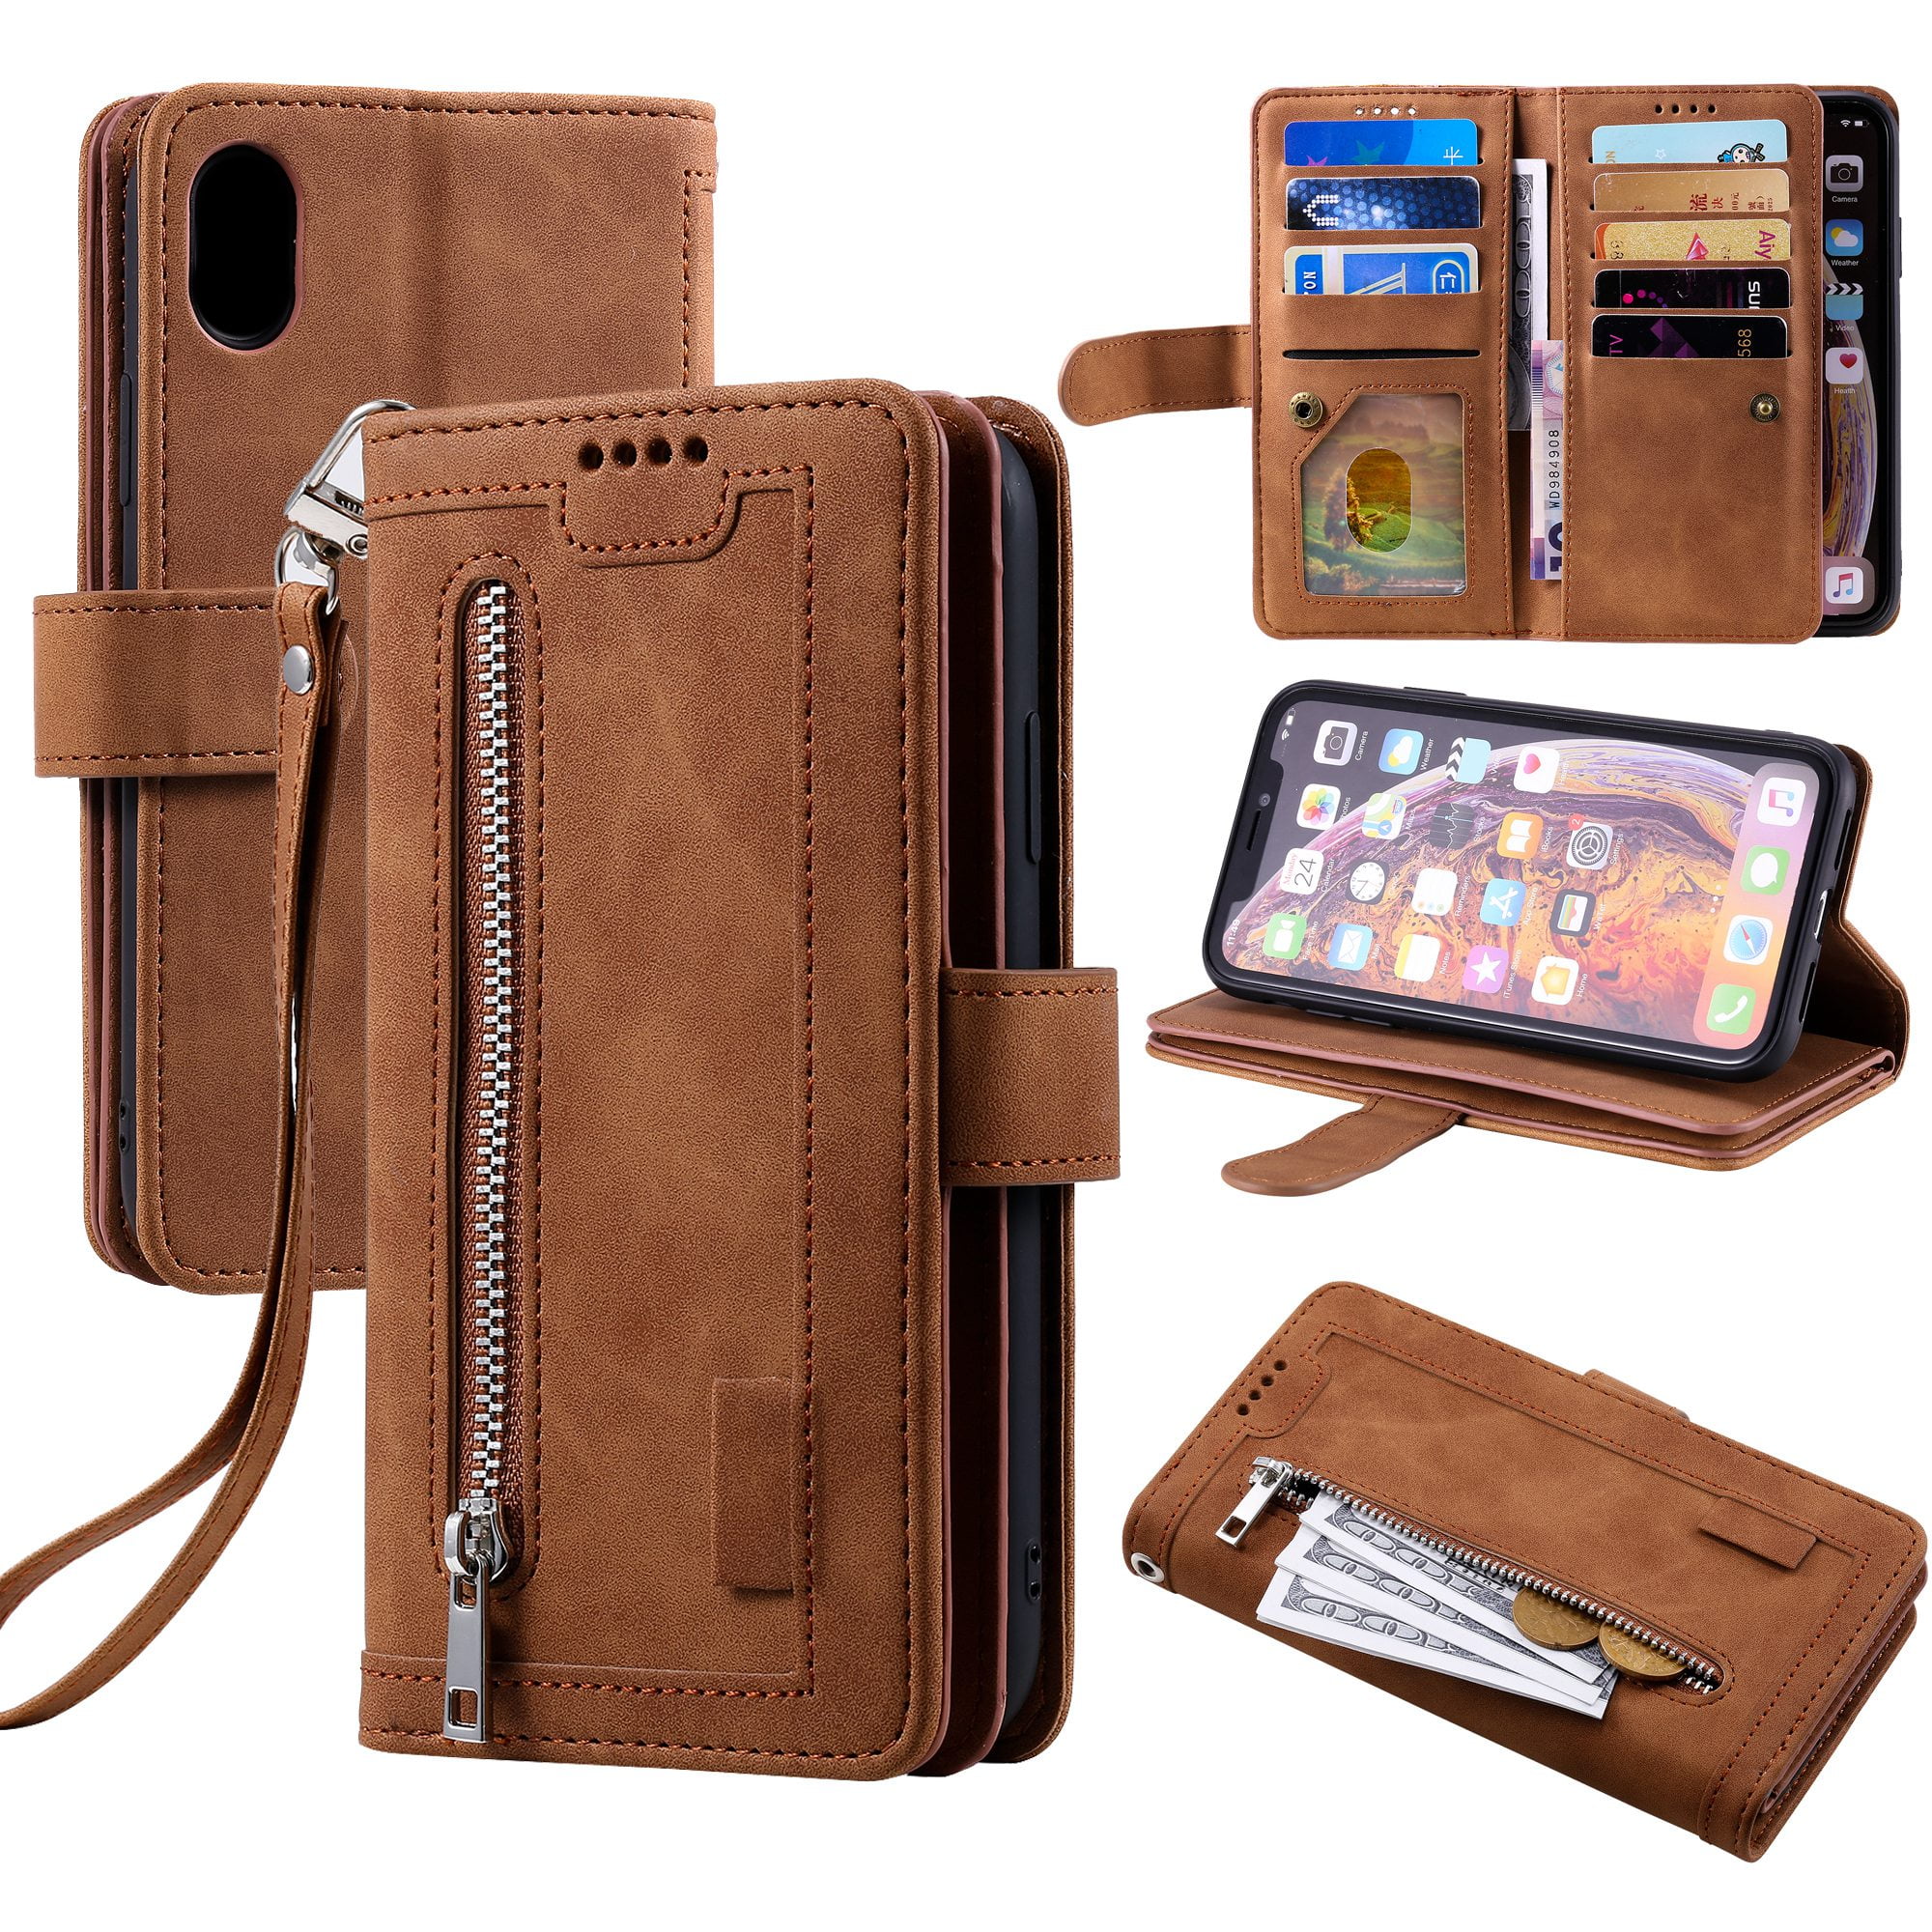 Flip Case for iPhone XR Compatible with iPhone XR Brown PU Leather Wallet Cover 